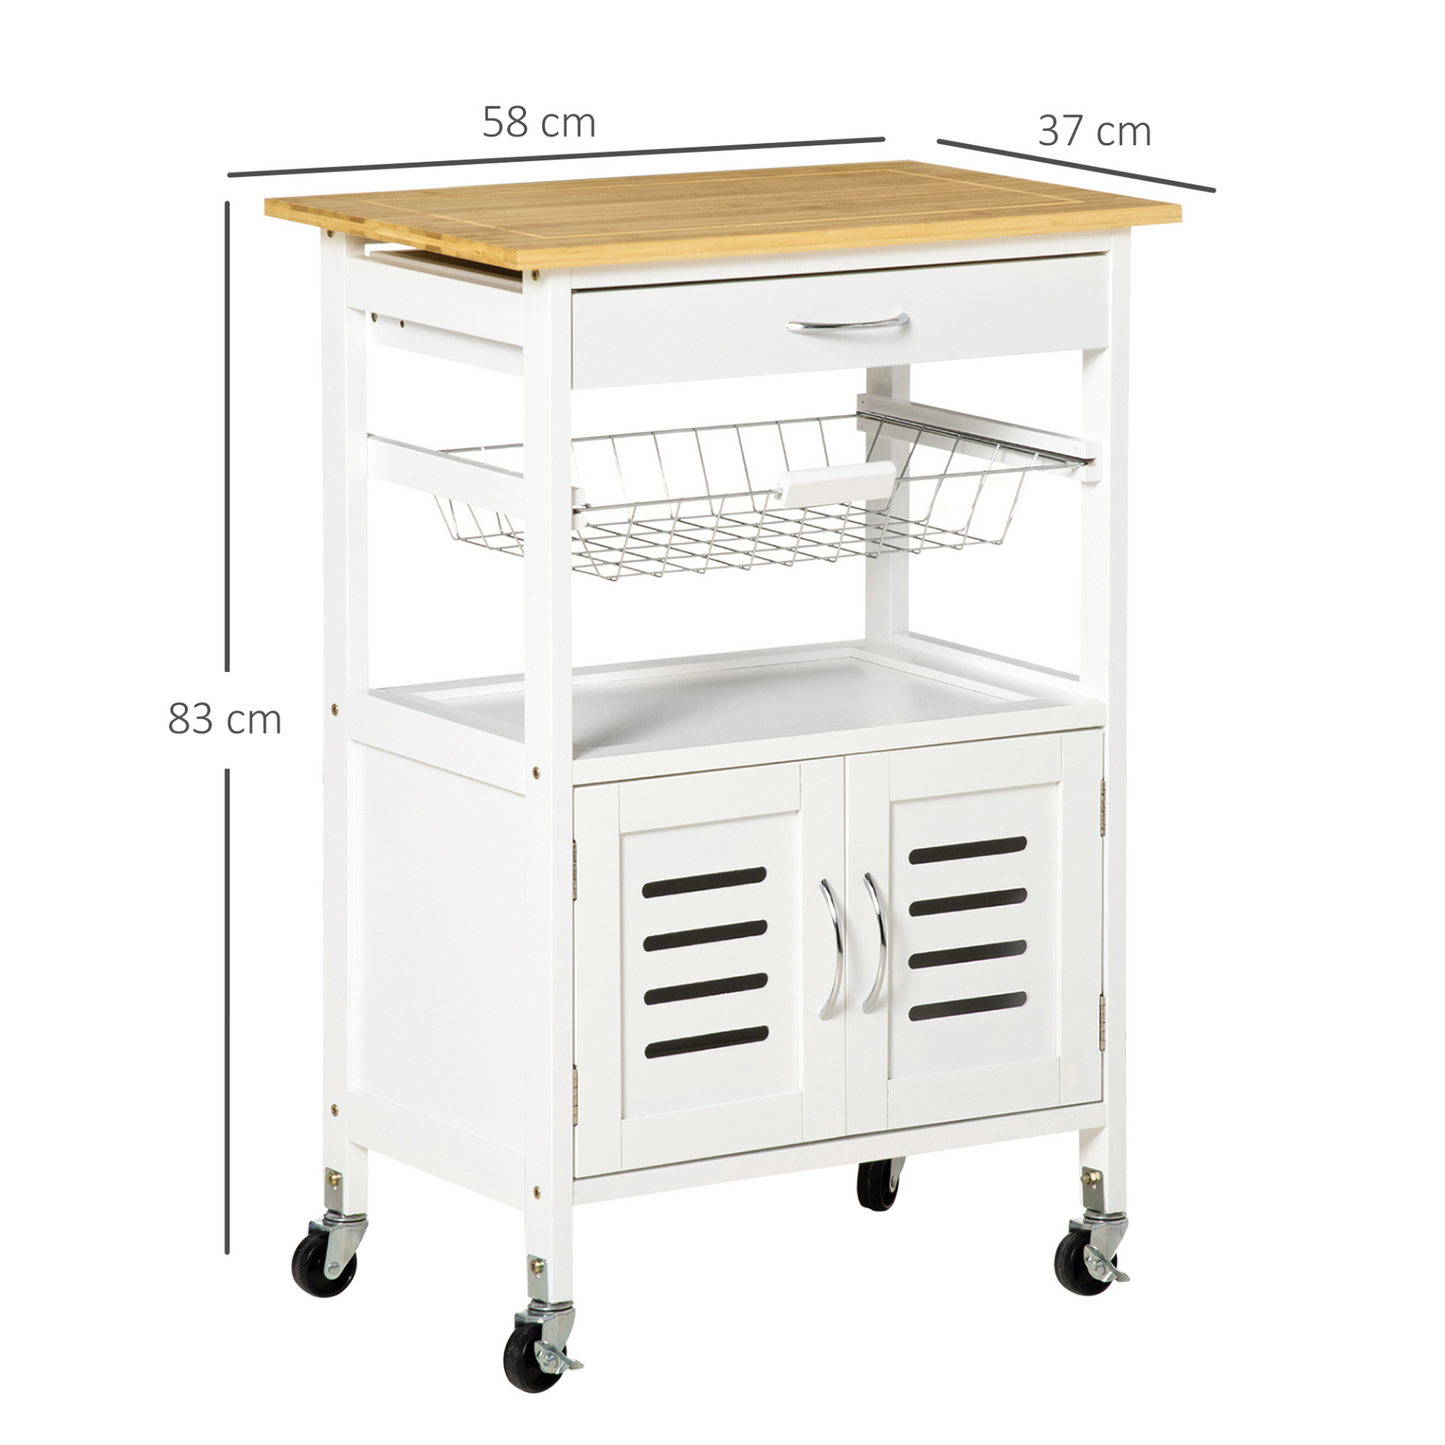 HOMCOM Rolling Kitchen Island Trolley Utility Cart on Wheels with Bamboo Table Top, Storage Cabinet, Drawer and Wire Basket